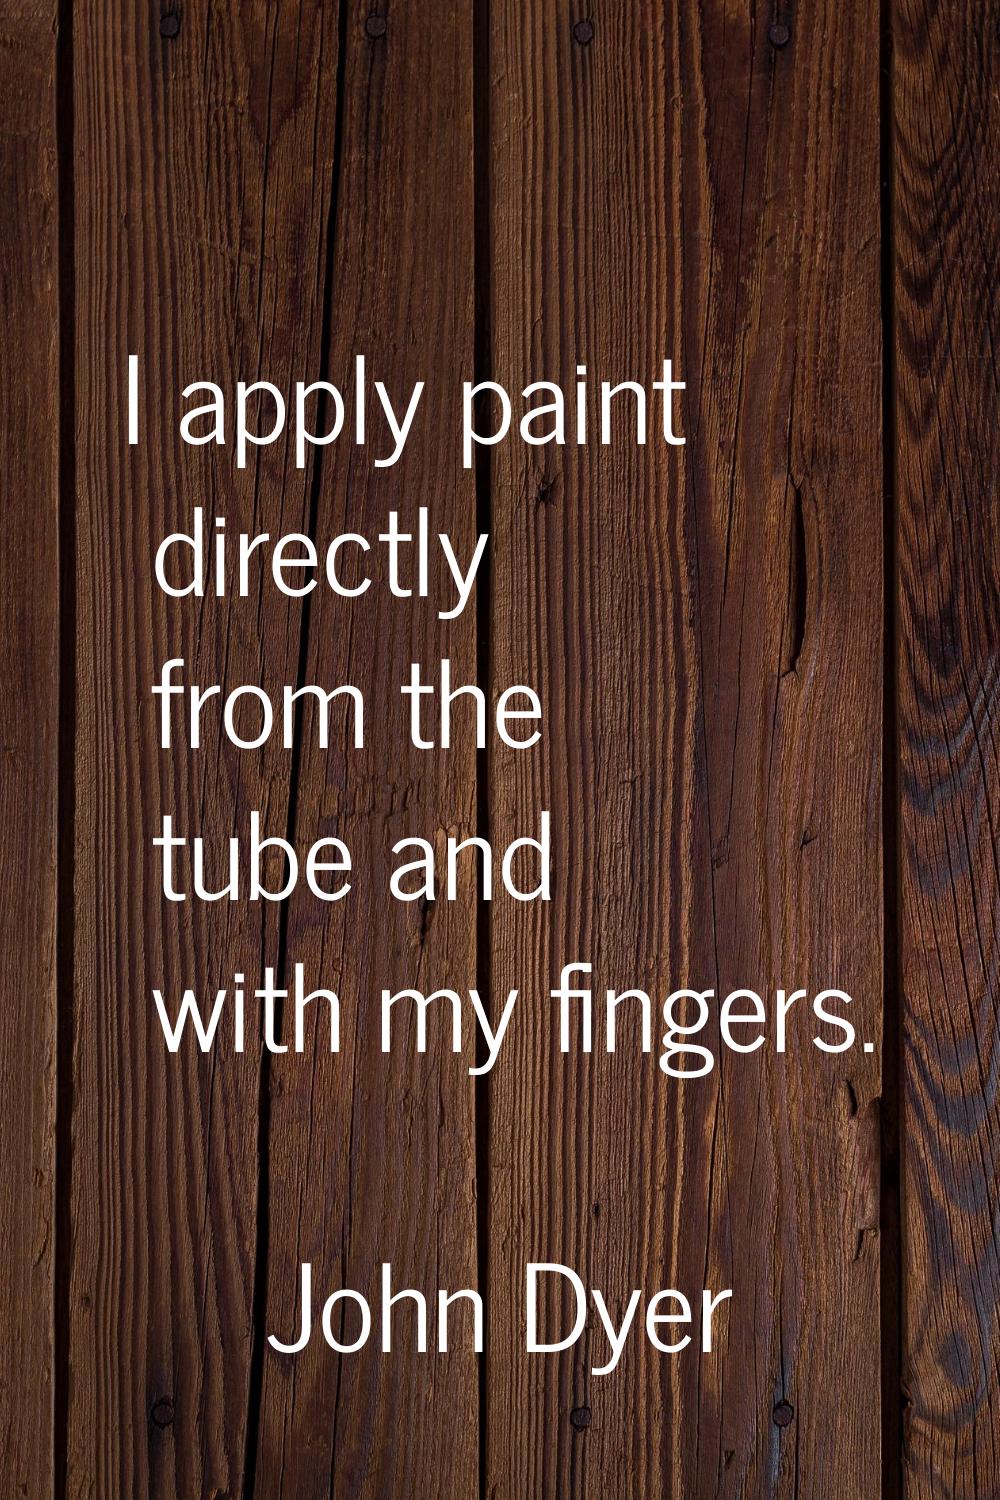 I apply paint directly from the tube and with my fingers.